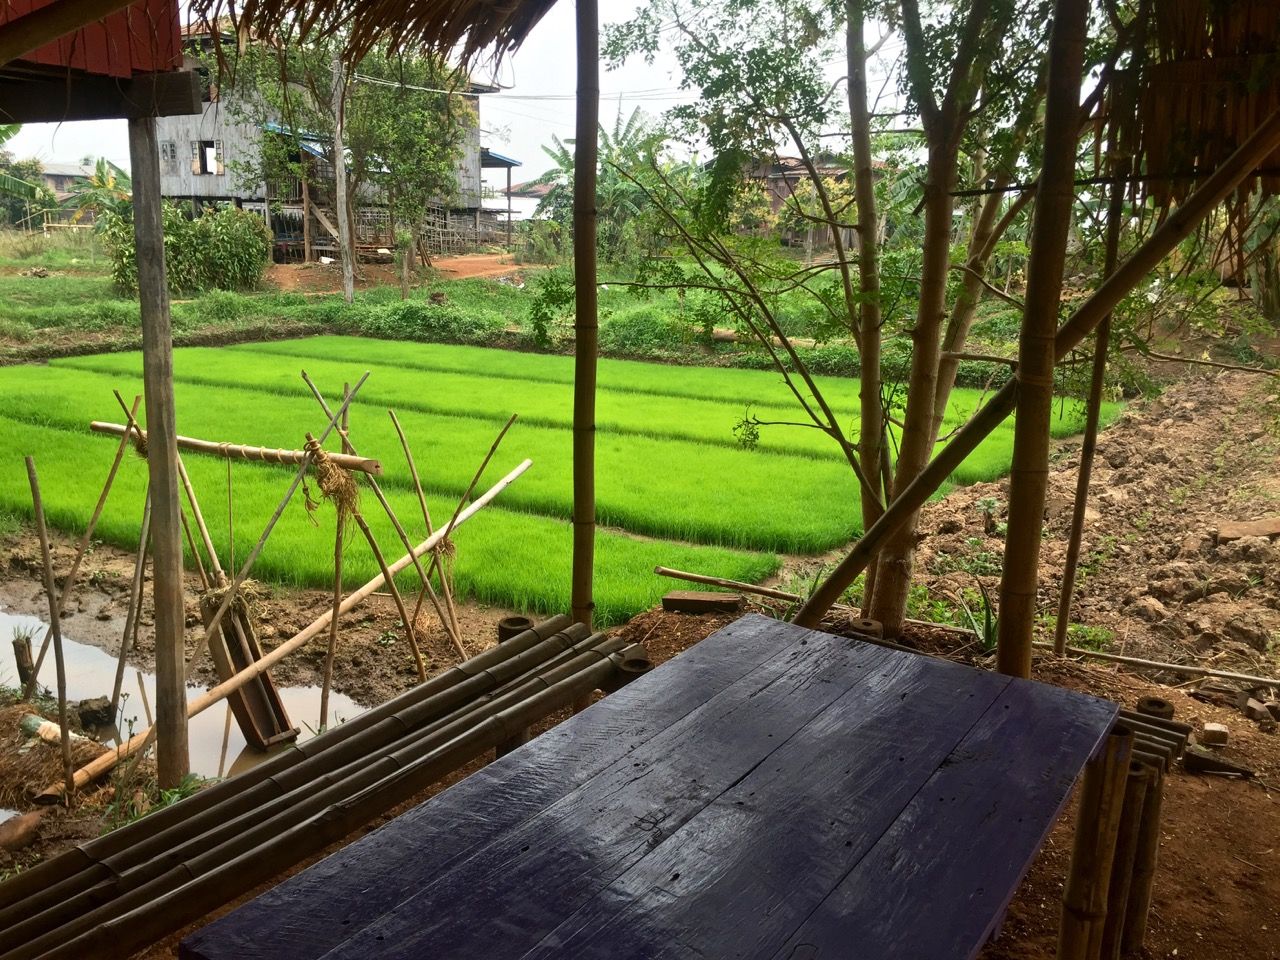 Lunch table next to a young rice field.